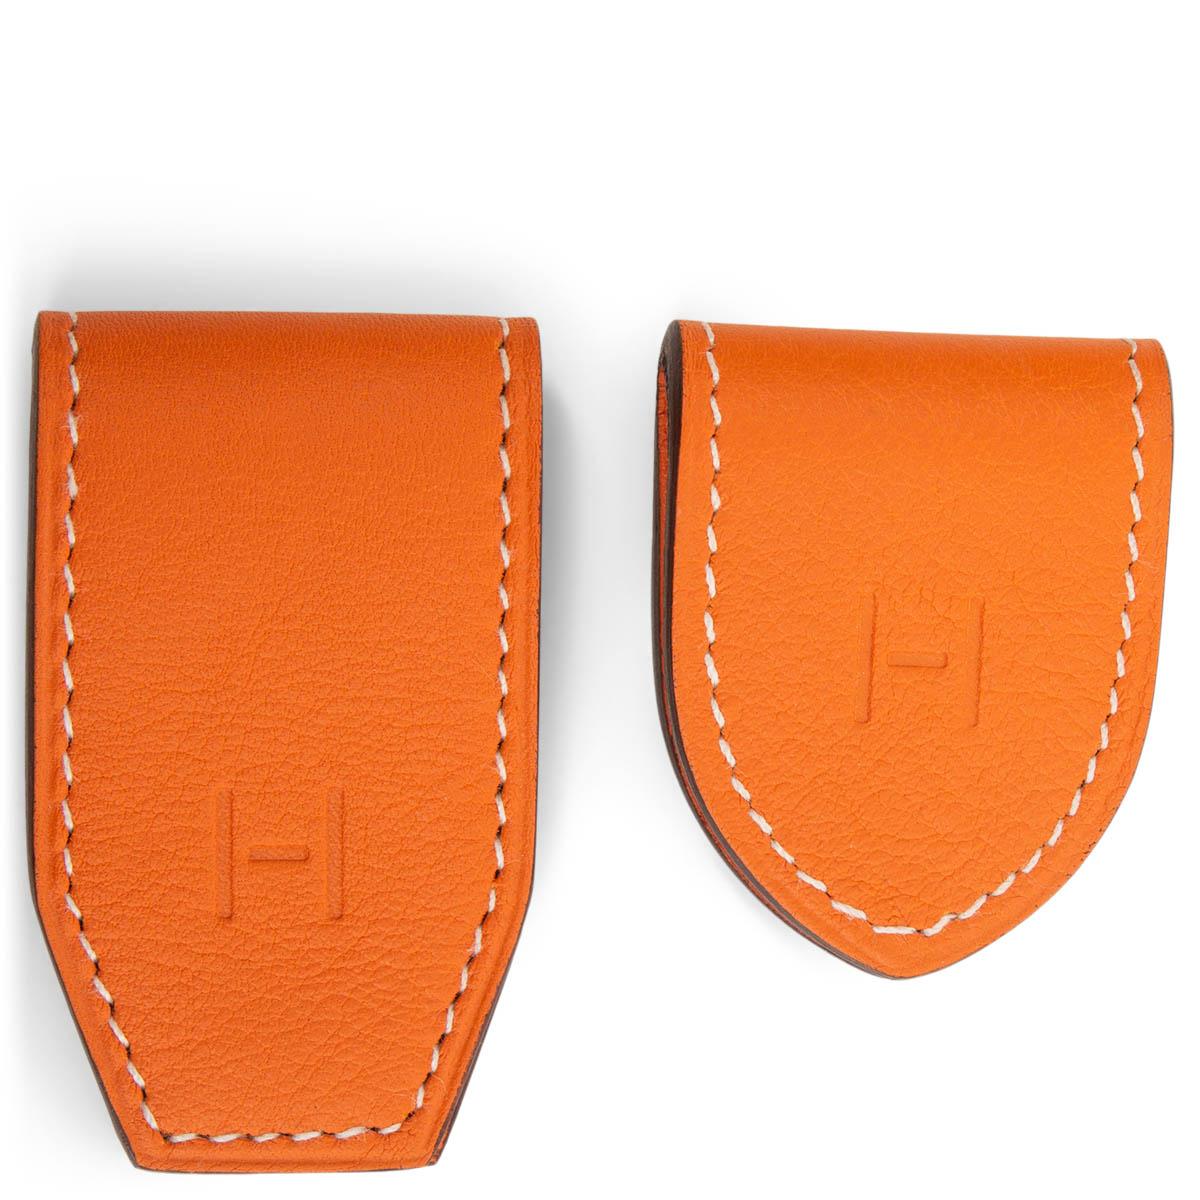 100% authentic Hermès AT'H Set of 2 Magnets / Money Clips orange Swift leather. Brand new. No box. 

Measurements
Width	3.5cm (1.4in)
Height	6cm (2.3in) / 5cm (1.97in)

All our listings include only the listed item unless otherwise specified in the